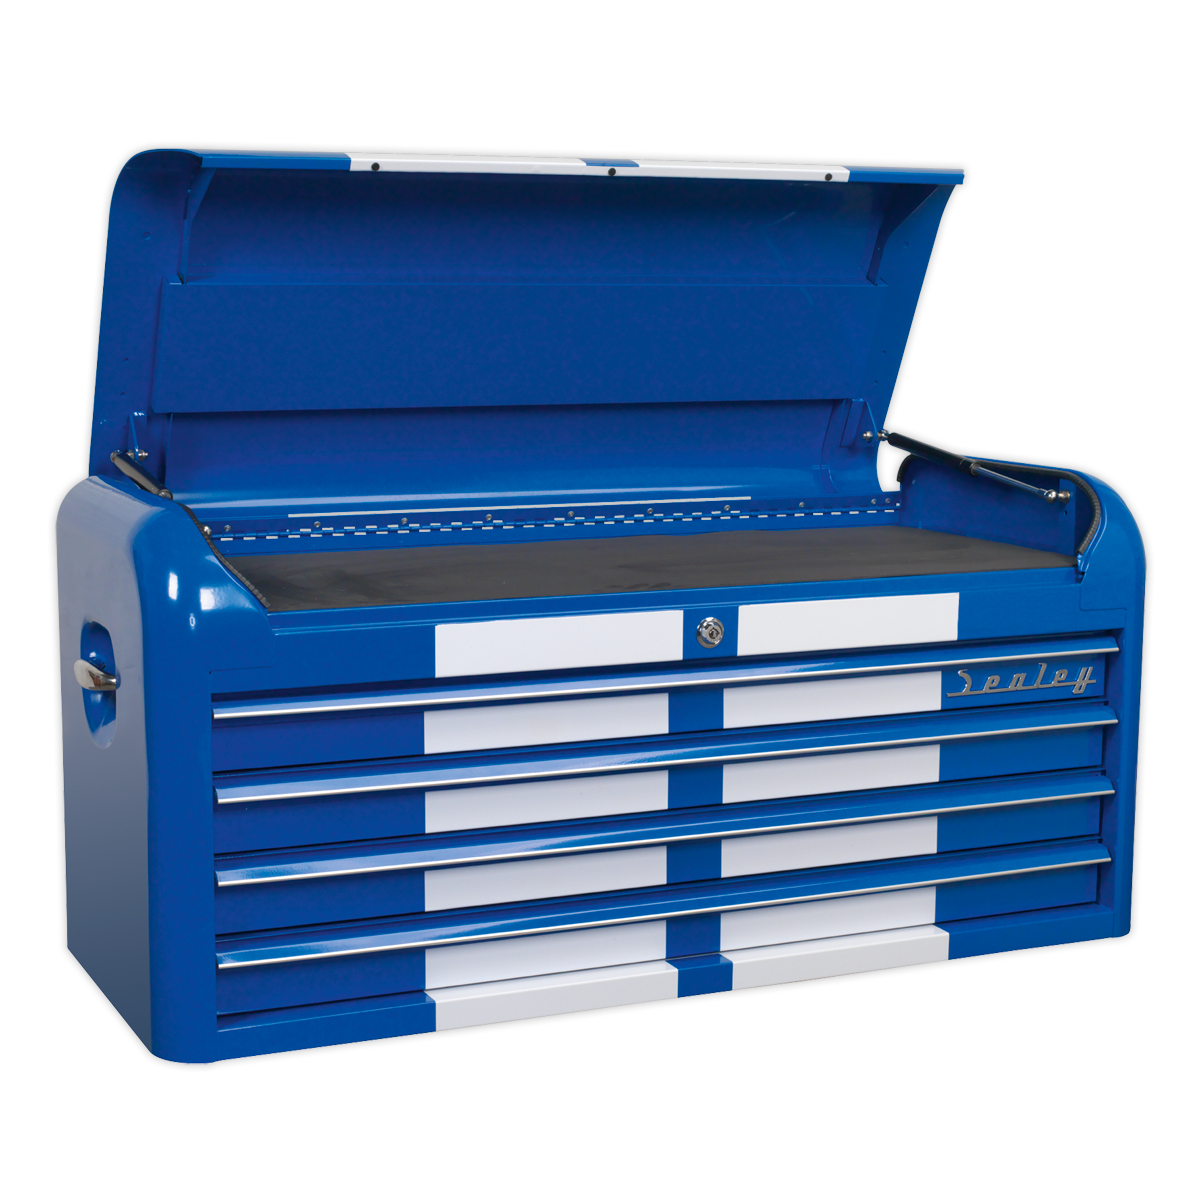 Topchest 4 Drawer Wide Retro Style - Blue with White Stripes - AP41104BWS - Farming Parts